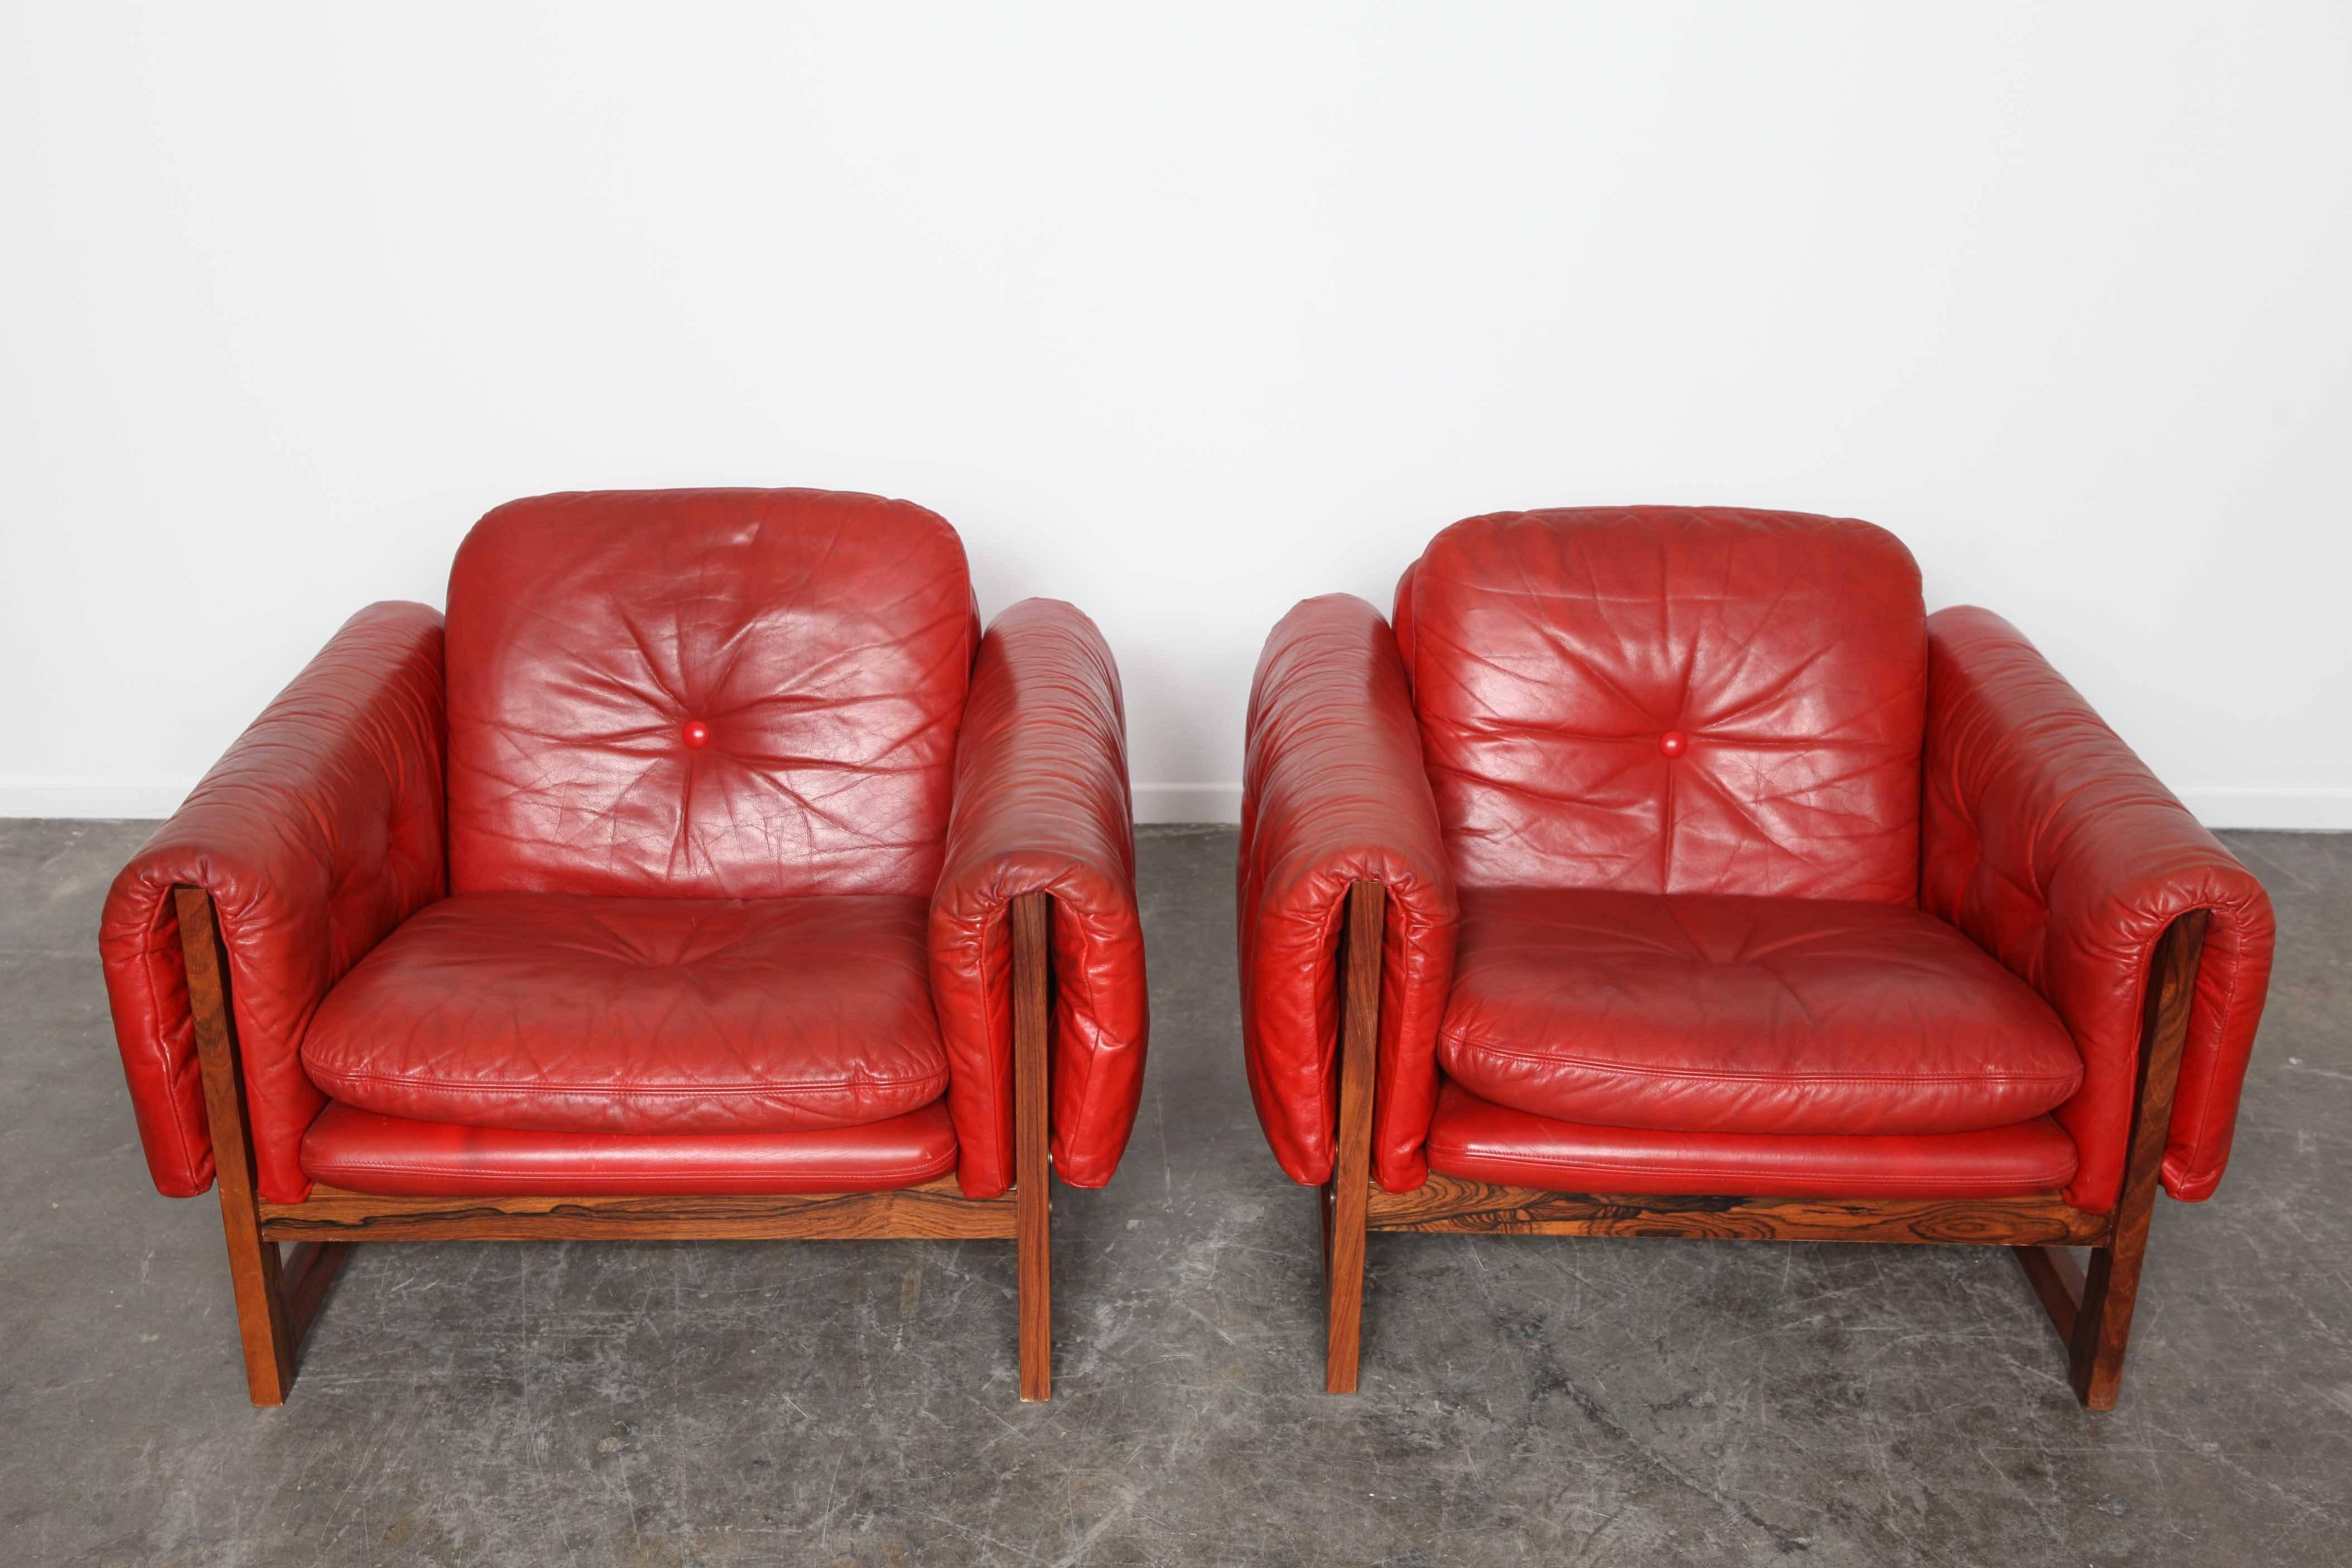 Pair of tufted, red leather 